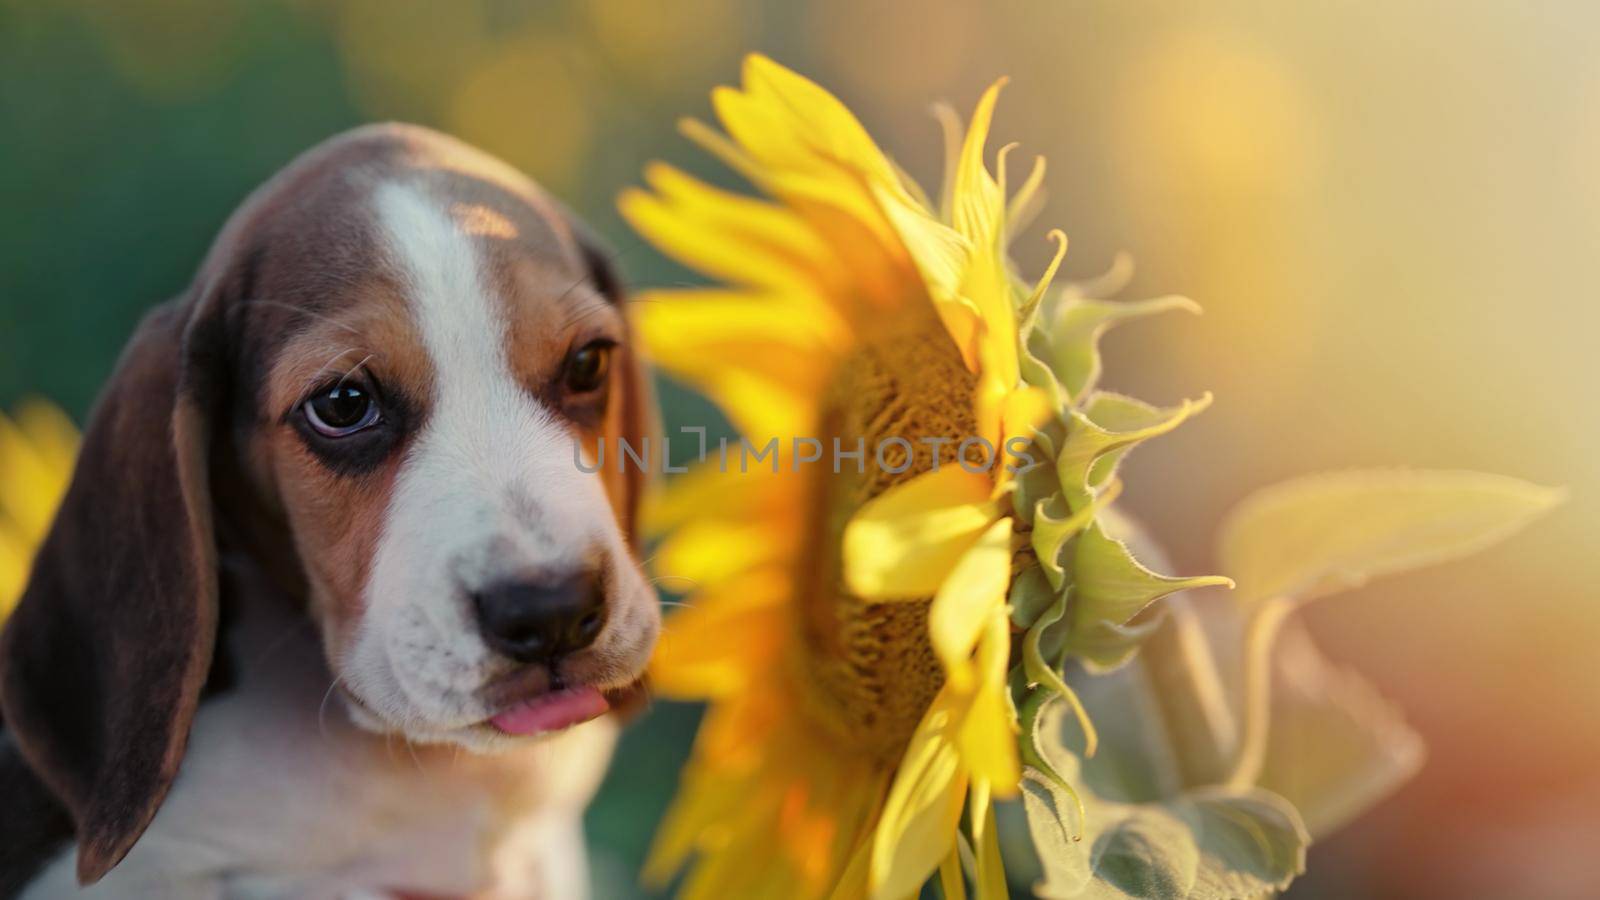 Little puppy of beagle sniffs sunflower flower in field. Beagles is always hungry, Diet, advertising pet food, dog's feed, concept. by kristina_kokhanova